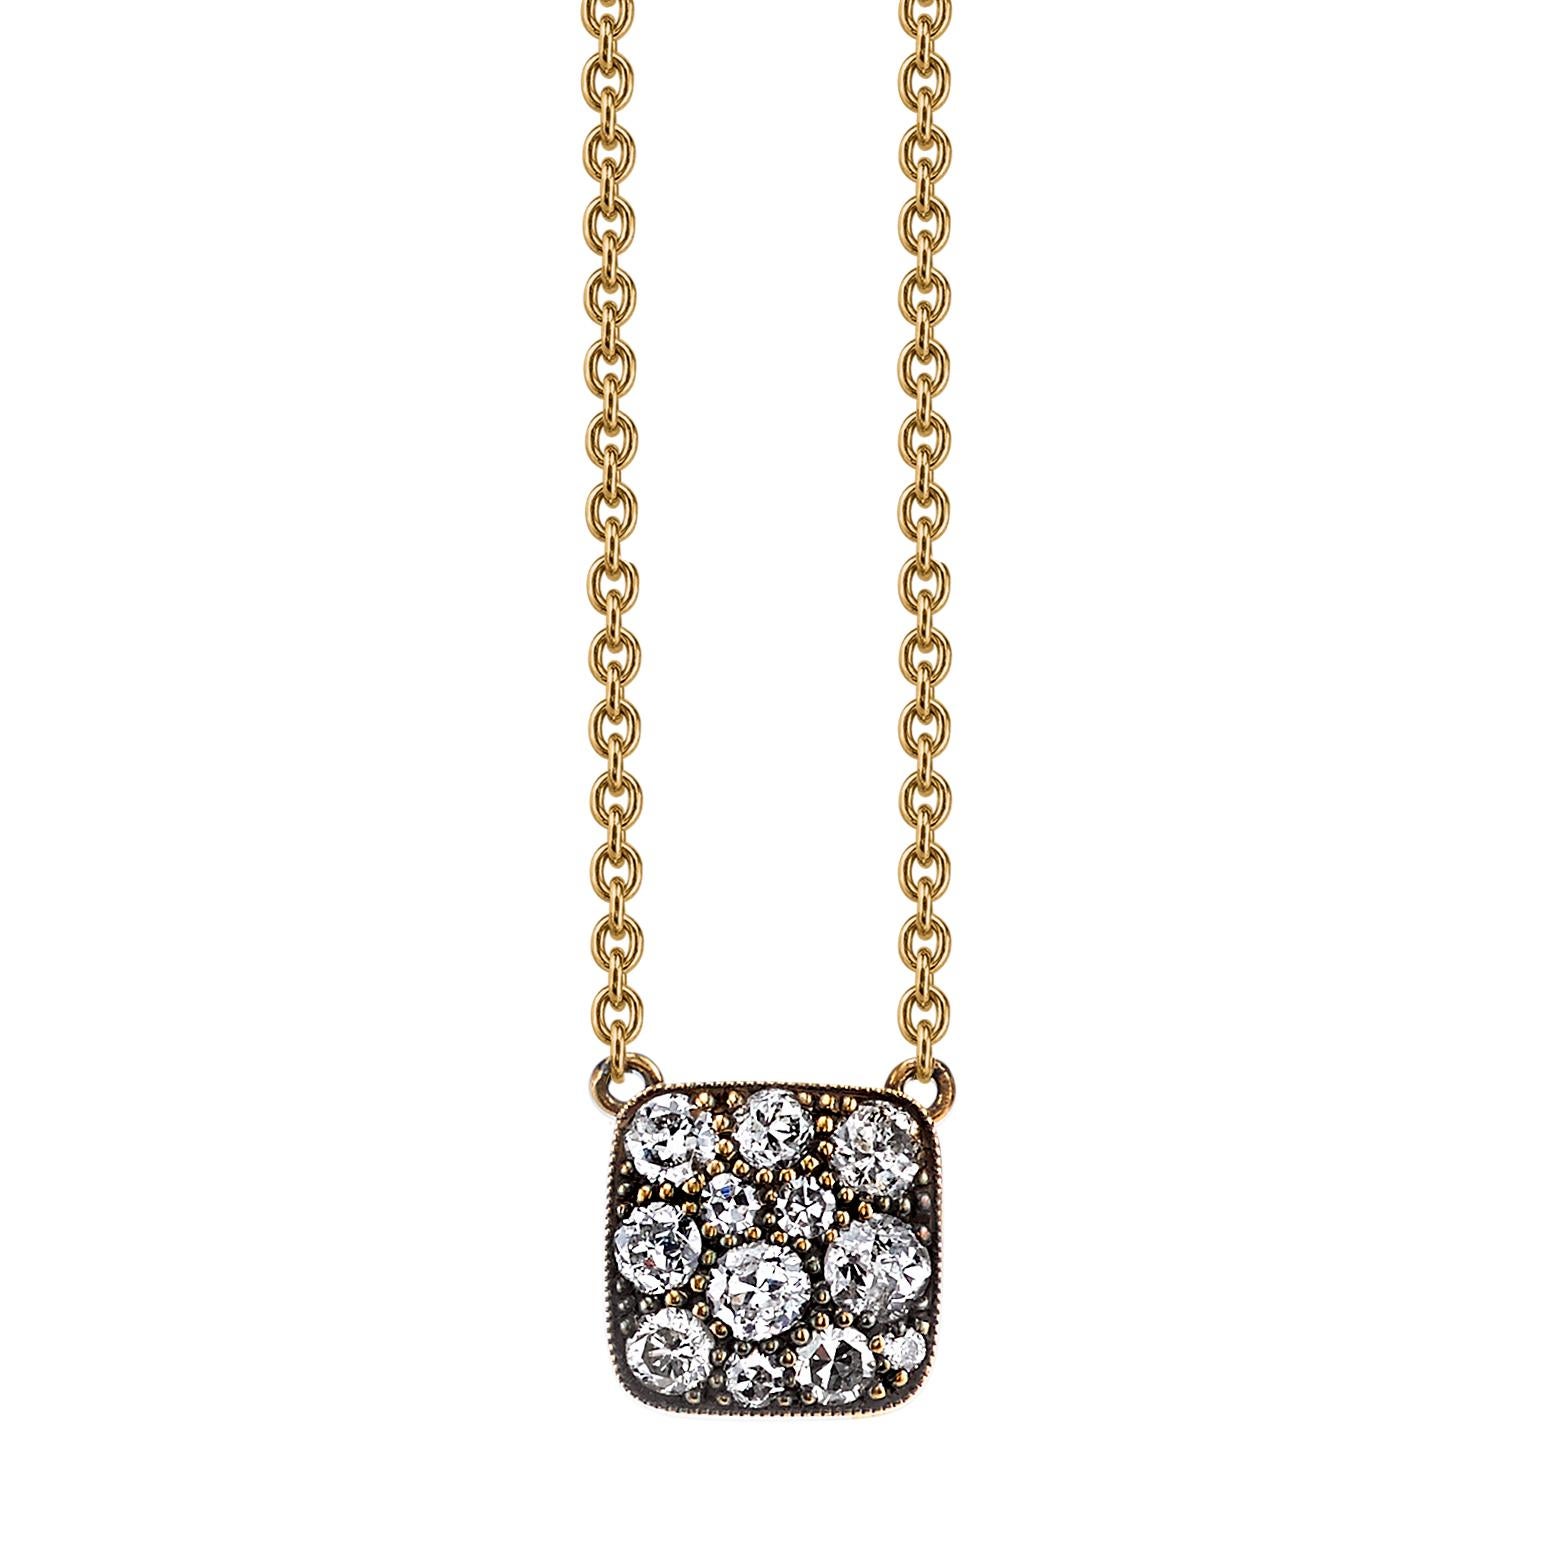 Approximately 0.35ctw varying old cut and round brilliant cut diamonds in a handcrafted 18K yellow gold pendant. Available in an oxidized or polished finish, please specify when ordering. Necklace measures 18